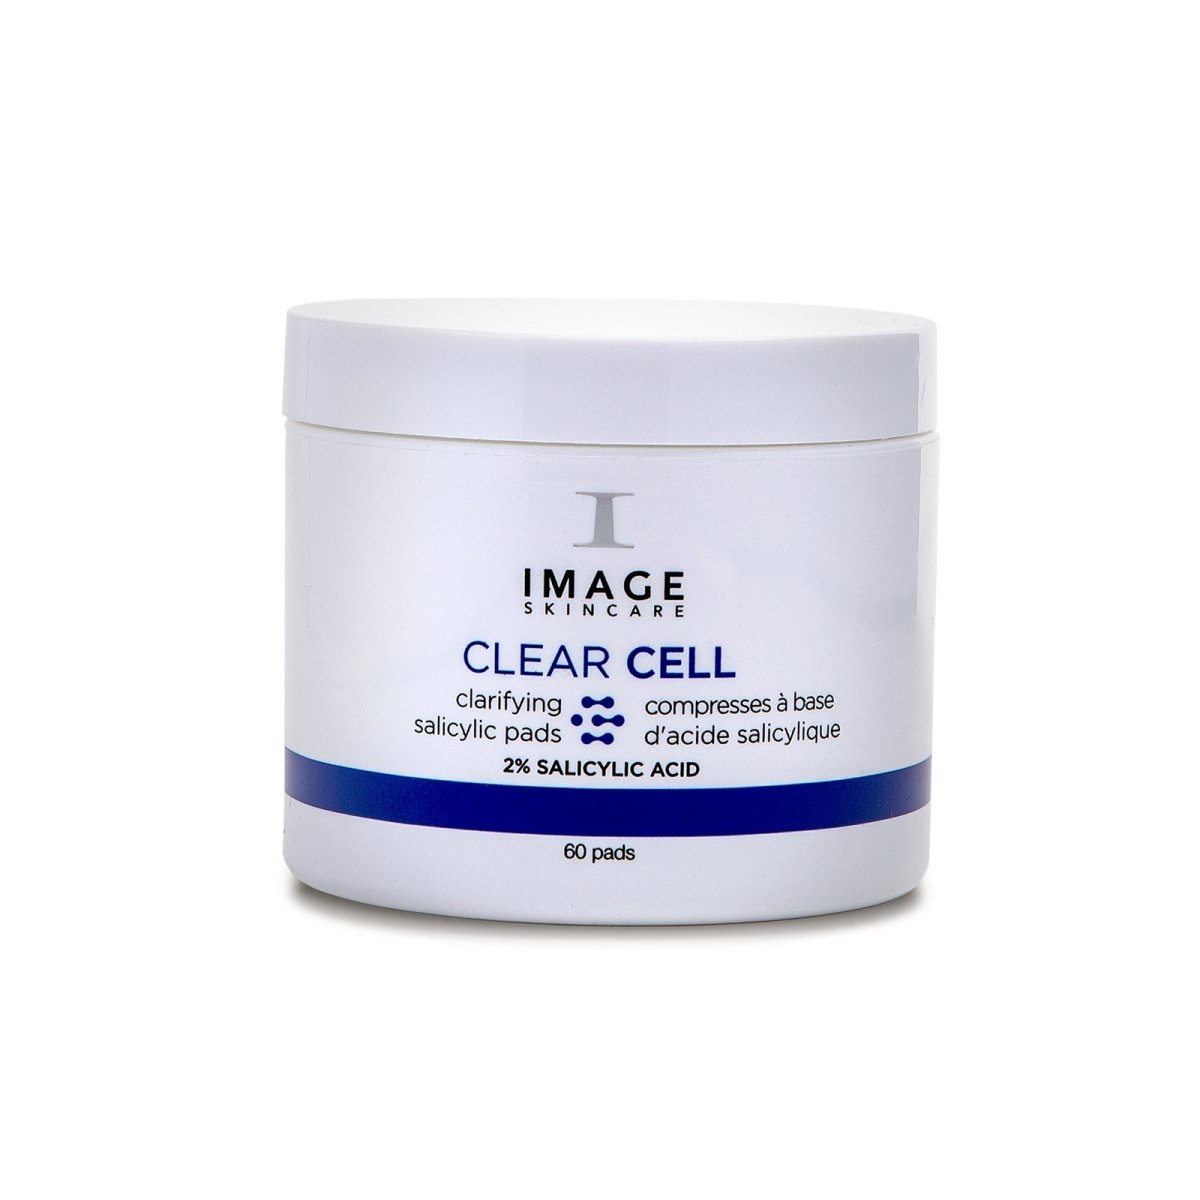 IMAGE Skincare Clear Cell Salicylic Clarifying Pads - SkincareEssentials